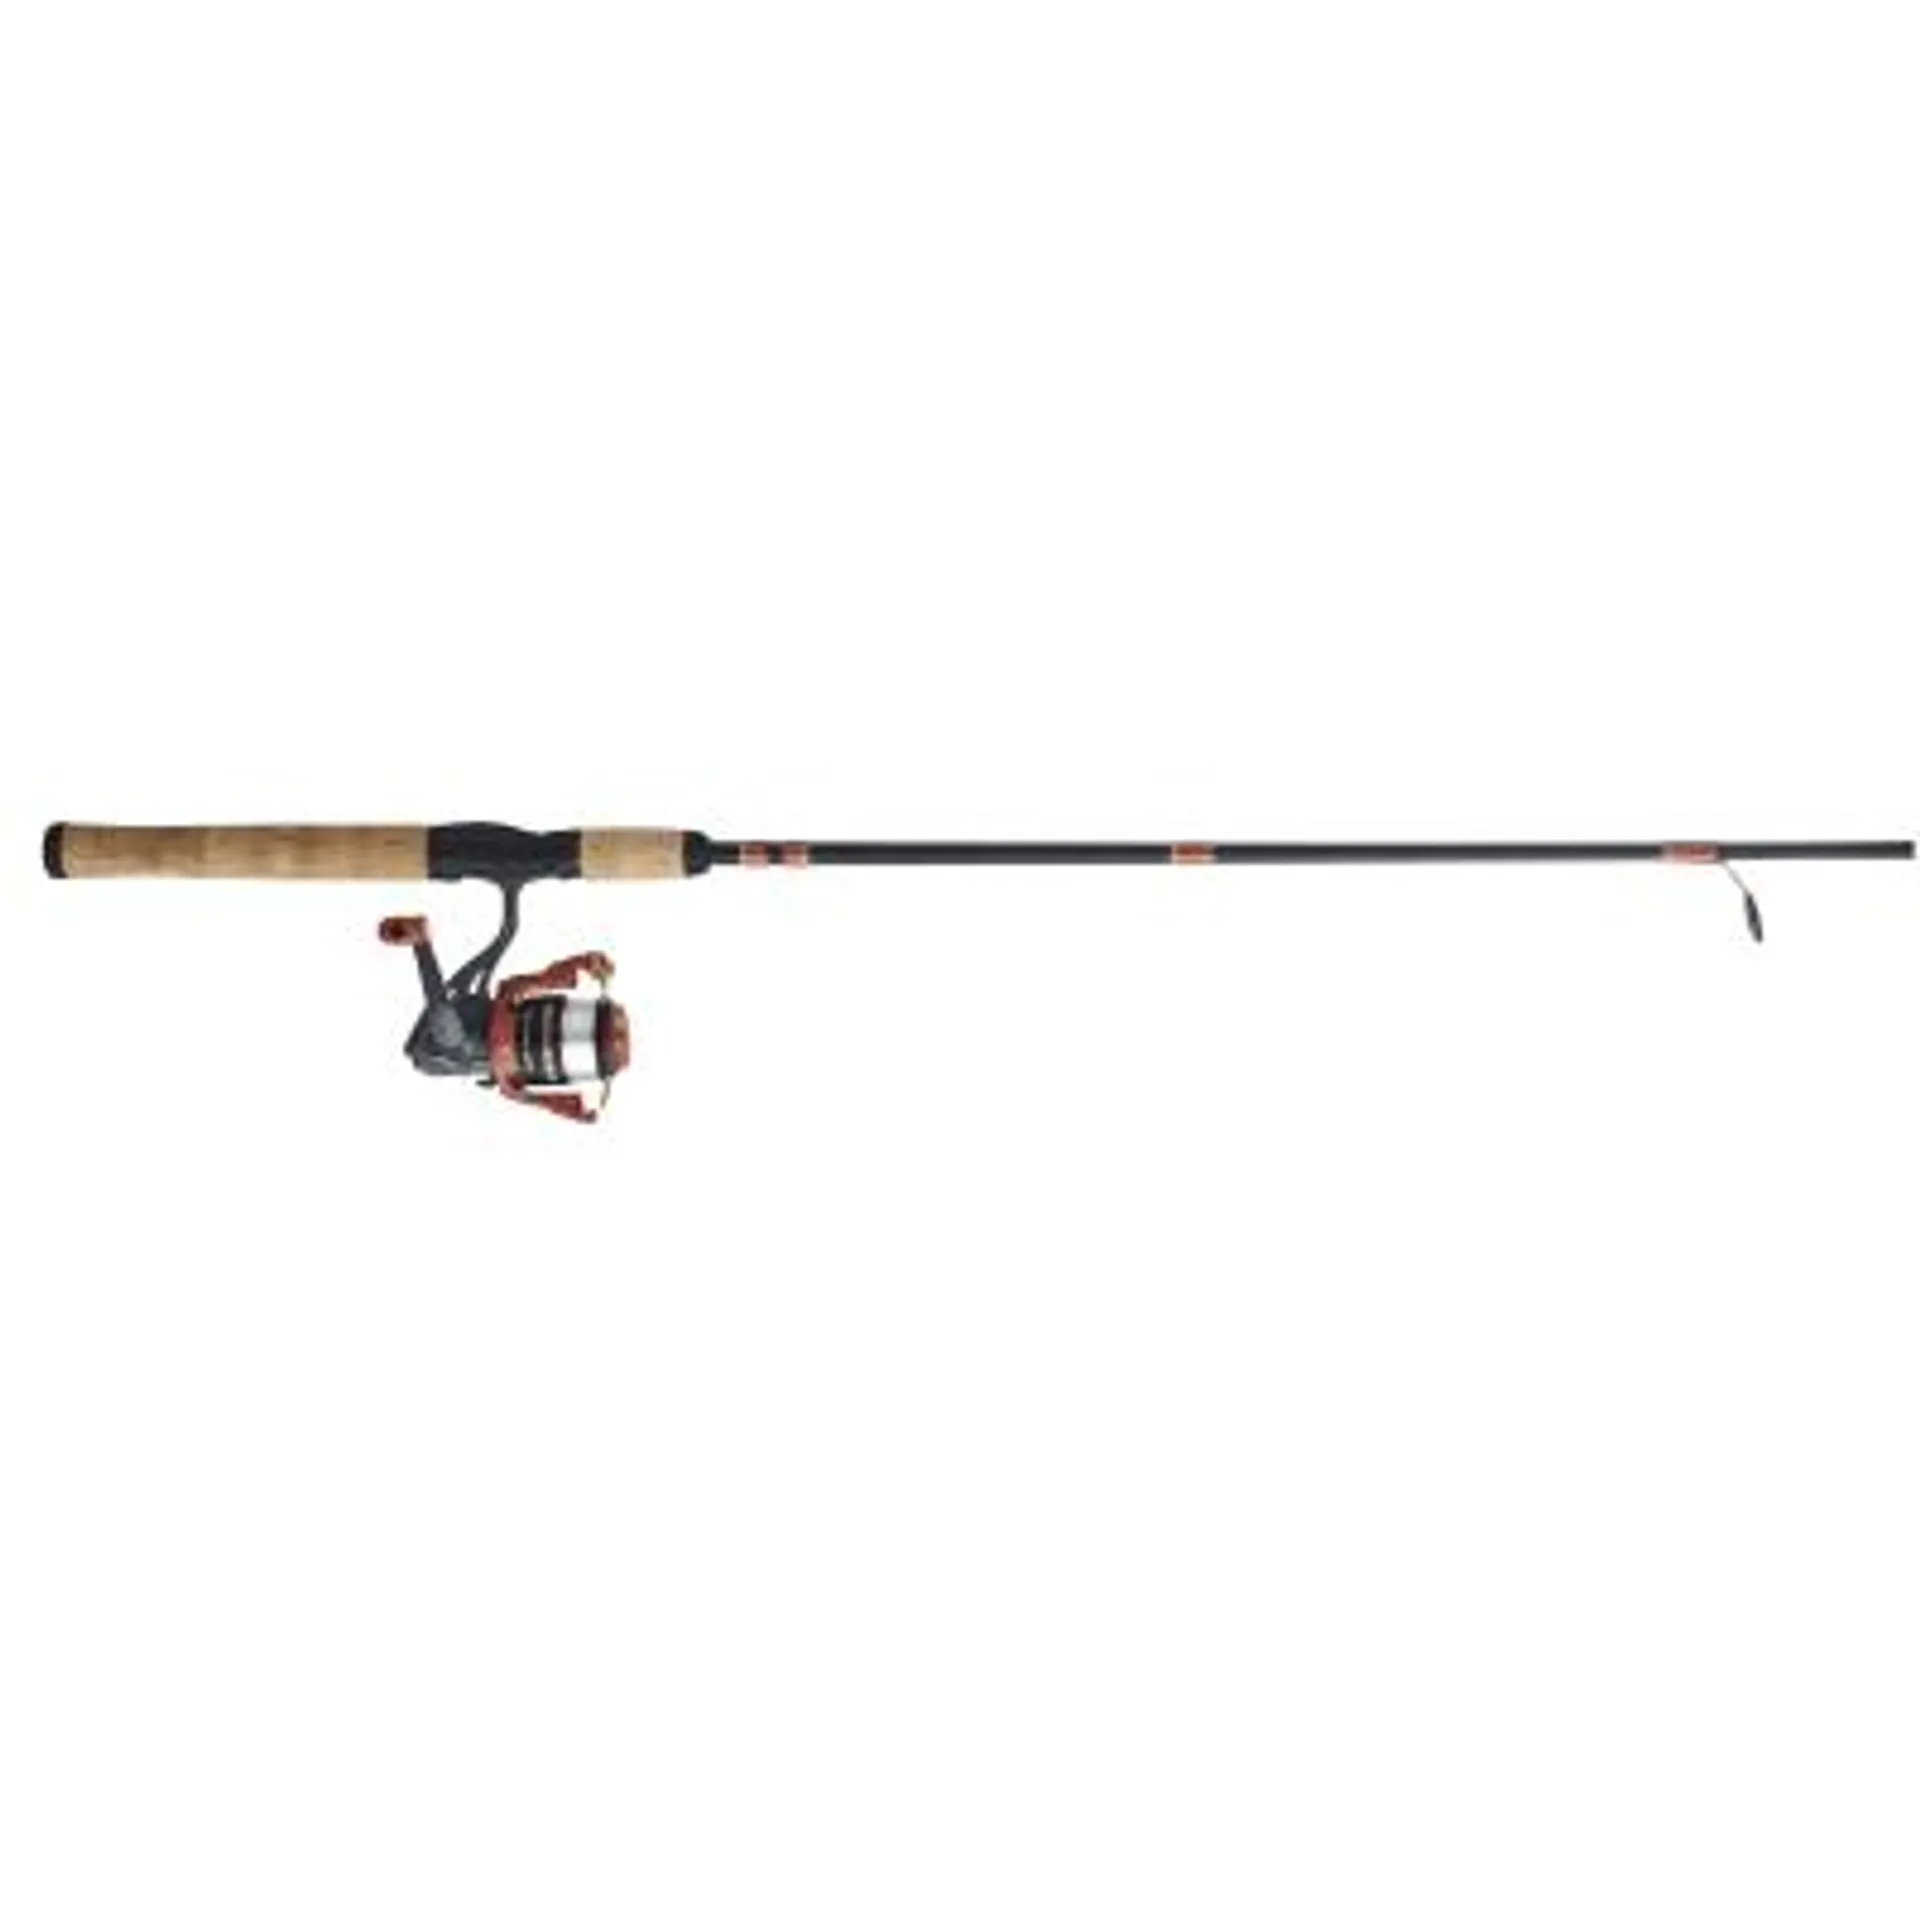 Shakespeare 6 ft. 6 in. 2 pc. M - Size 30 Crusader Spinning Combo